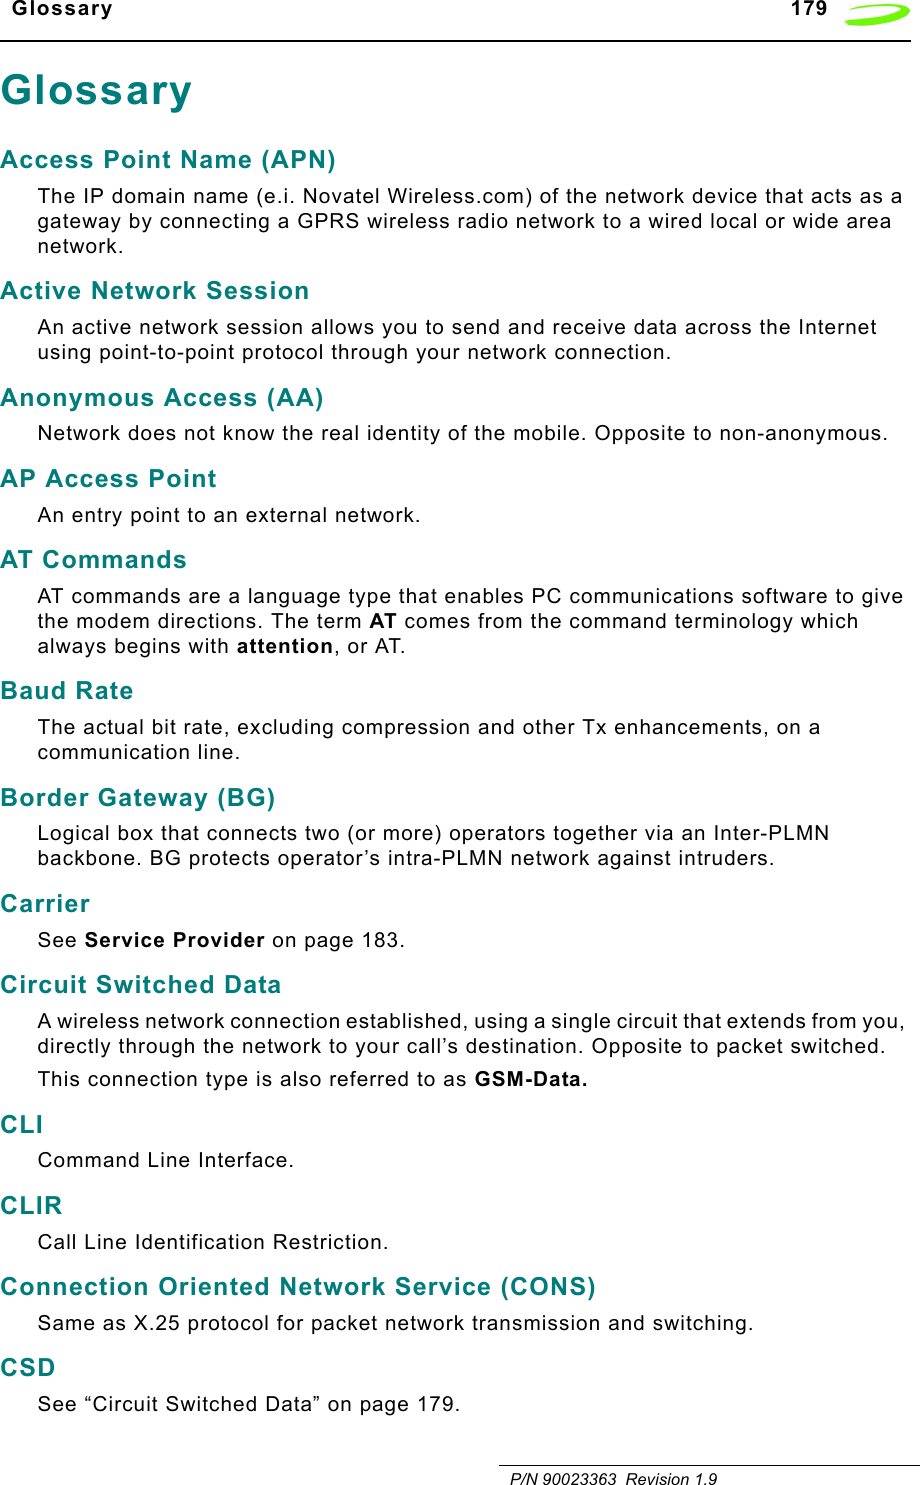   Glossary 179   P/N 90023363  Revision 1.9GlossaryAccess Point Name (APN)The IP domain name (e.i. Novatel Wireless.com) of the network device that acts as a gateway by connecting a GPRS wireless radio network to a wired local or wide area network.Active Network SessionAn active network session allows you to send and receive data across the Internet using point-to-point protocol through your network connection.Anonymous Access (AA)Network does not know the real identity of the mobile. Opposite to non-anonymous.AP Access PointAn entry point to an external network.AT CommandsAT commands are a language type that enables PC communications software to give the modem directions. The term AT comes from the command terminology which always begins with attention, or AT.Baud RateThe actual bit rate, excluding compression and other Tx enhancements, on a communication line.Border Gateway (BG)Logical box that connects two (or more) operators together via an Inter-PLMN backbone. BG protects operator’s intra-PLMN network against intruders.CarrierSee Service Provider on page 183.Circuit Switched DataA wireless network connection established, using a single circuit that extends from you, directly through the network to your call’s destination. Opposite to packet switched.This connection type is also referred to as GSM-Data.CLICommand Line Interface.CLIR Call Line Identification Restriction.Connection Oriented Network Service (CONS)Same as X.25 protocol for packet network transmission and switching.CSDSee “Circuit Switched Data” on page 179.